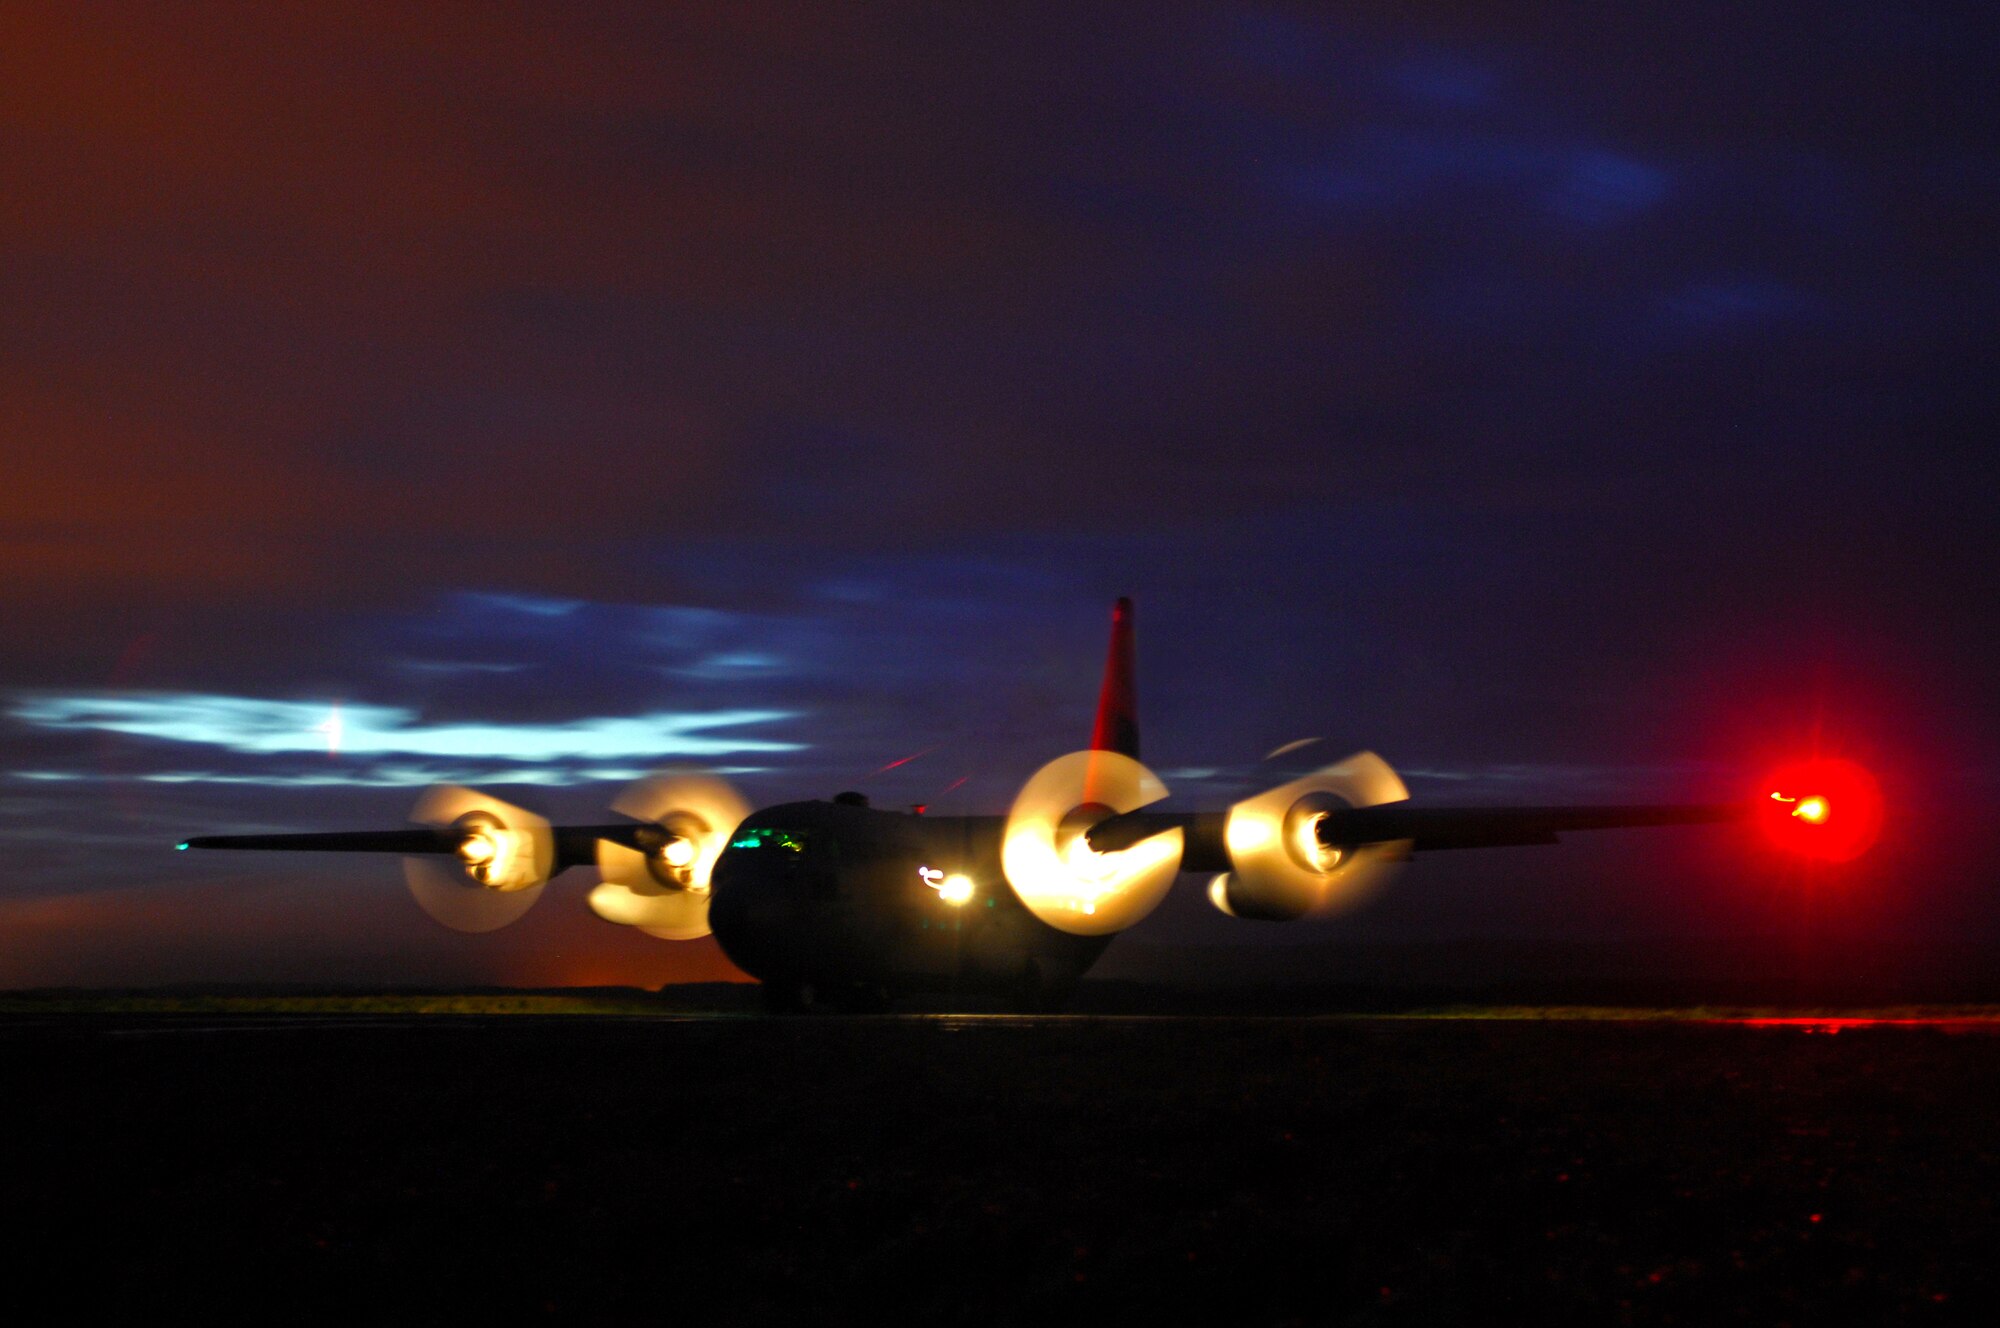 A United States Air Force C-130 Hercules from Ramstein Air Base prepares for a combat offload in the dead of night during an Operational Readiness Exercise, May 19, 2009, West Freugh Airfield, Scotland. (U.S. Air Force photo by Senior Airman Kenny Holston)